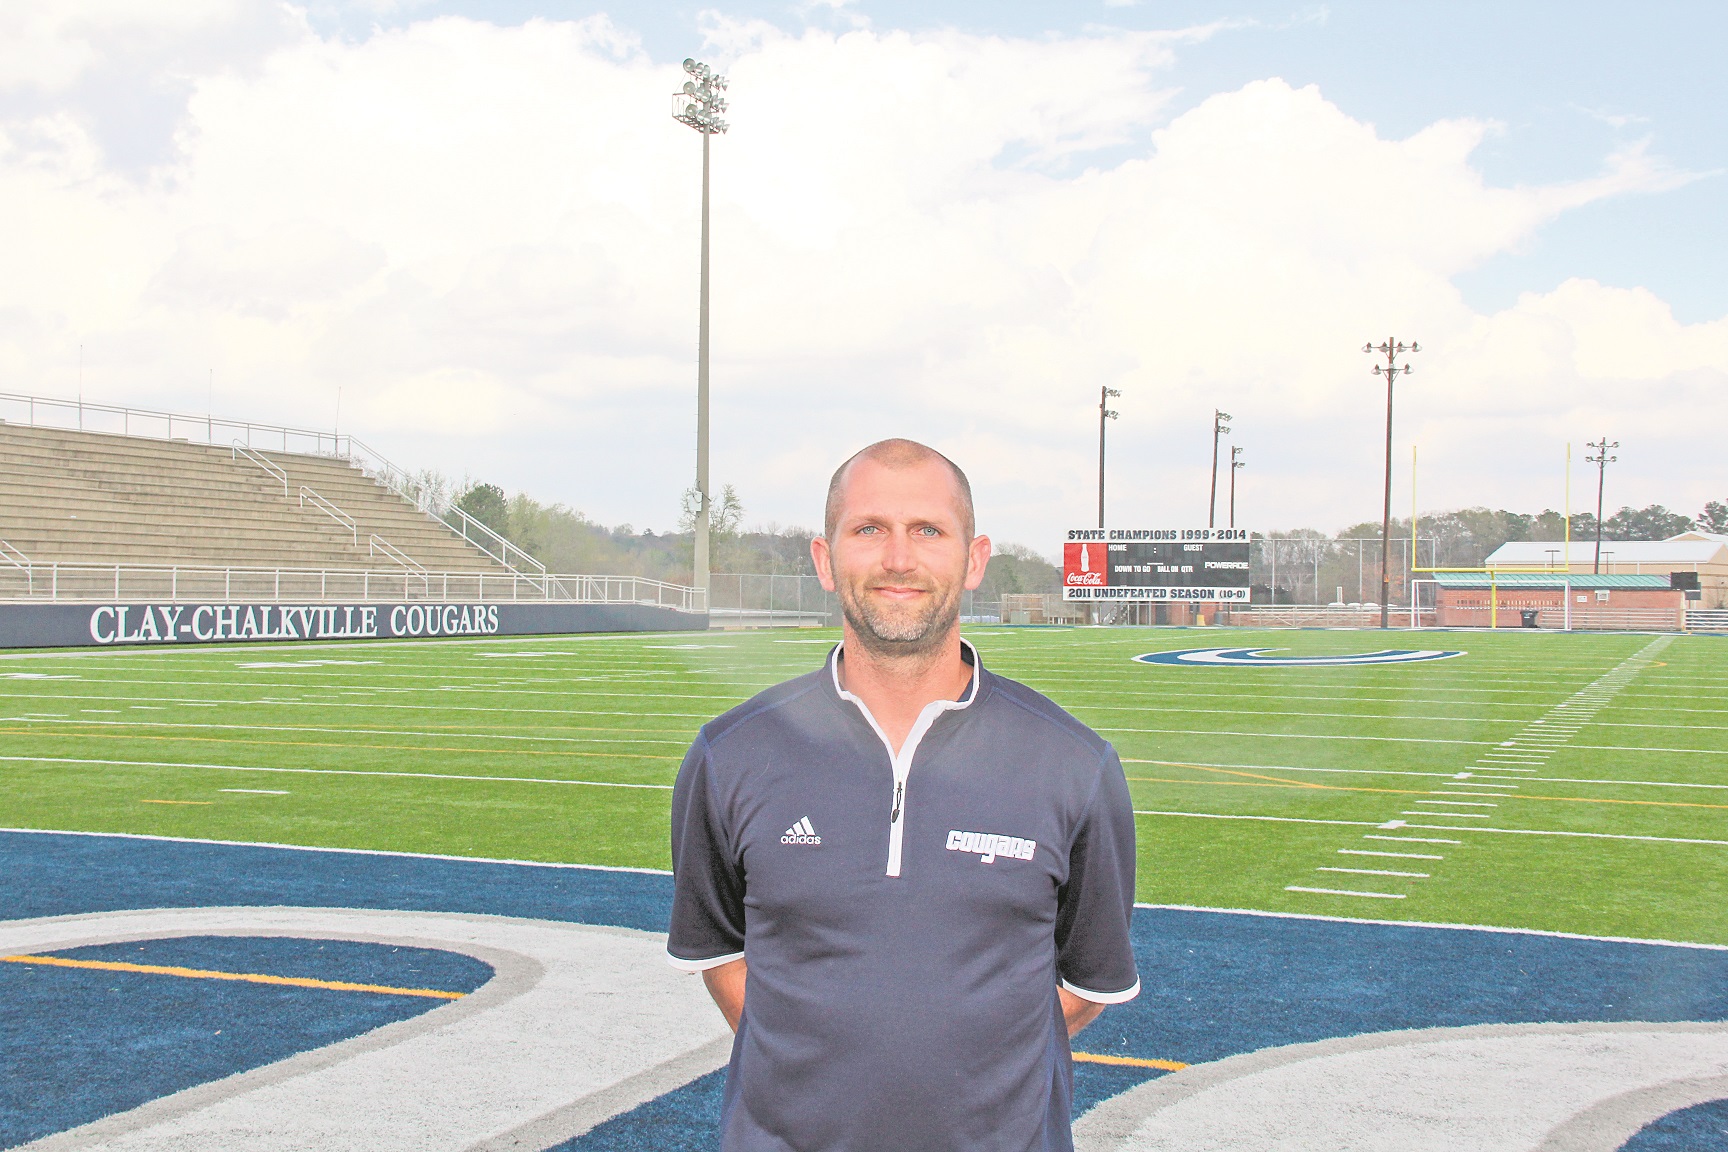 It's 'Gilmer': Getting to know the Cougars' new coach